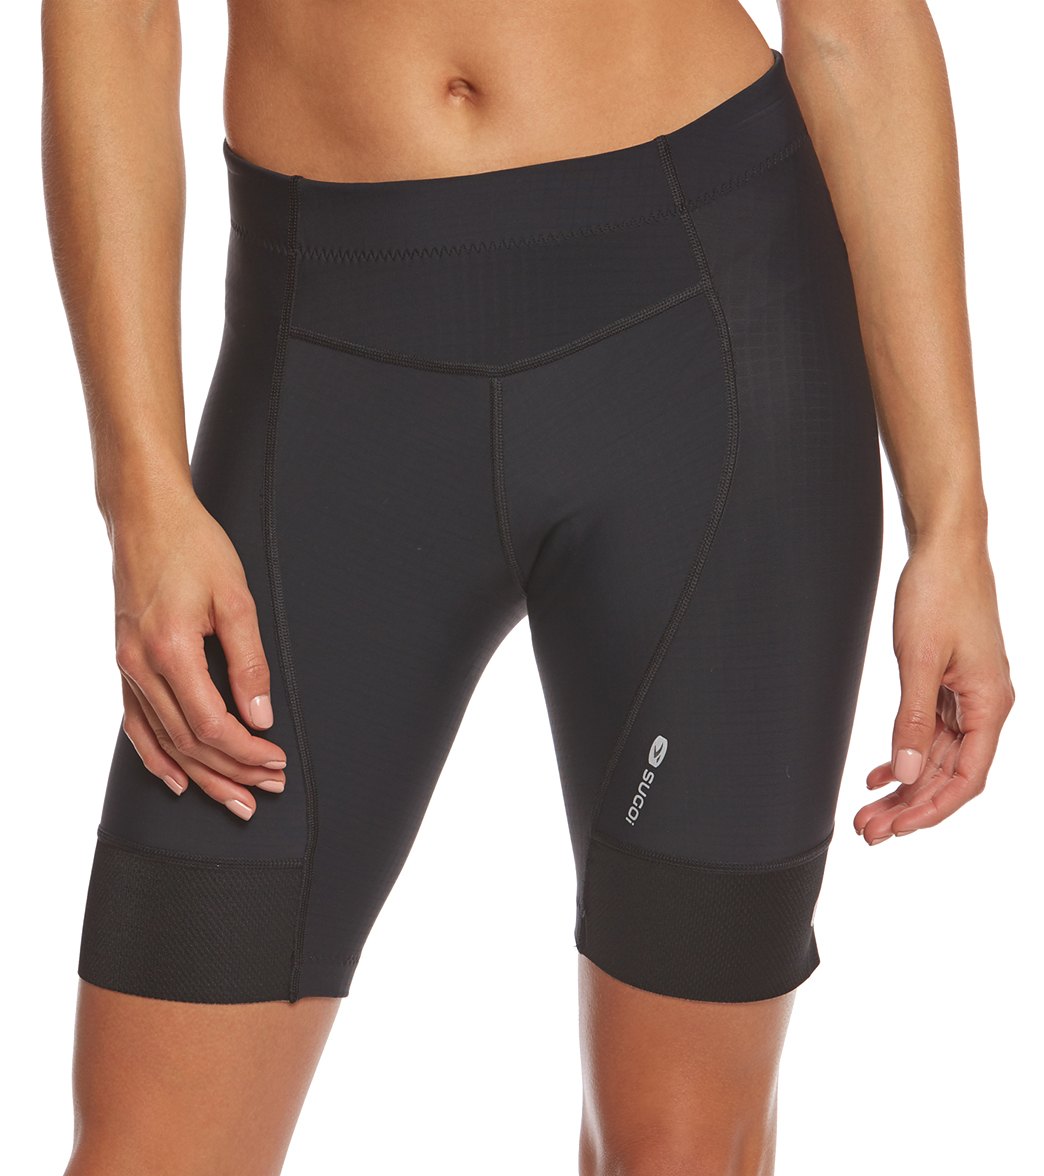 Sugoi Women's Evolution Cycling Short at SwimOutlet.com